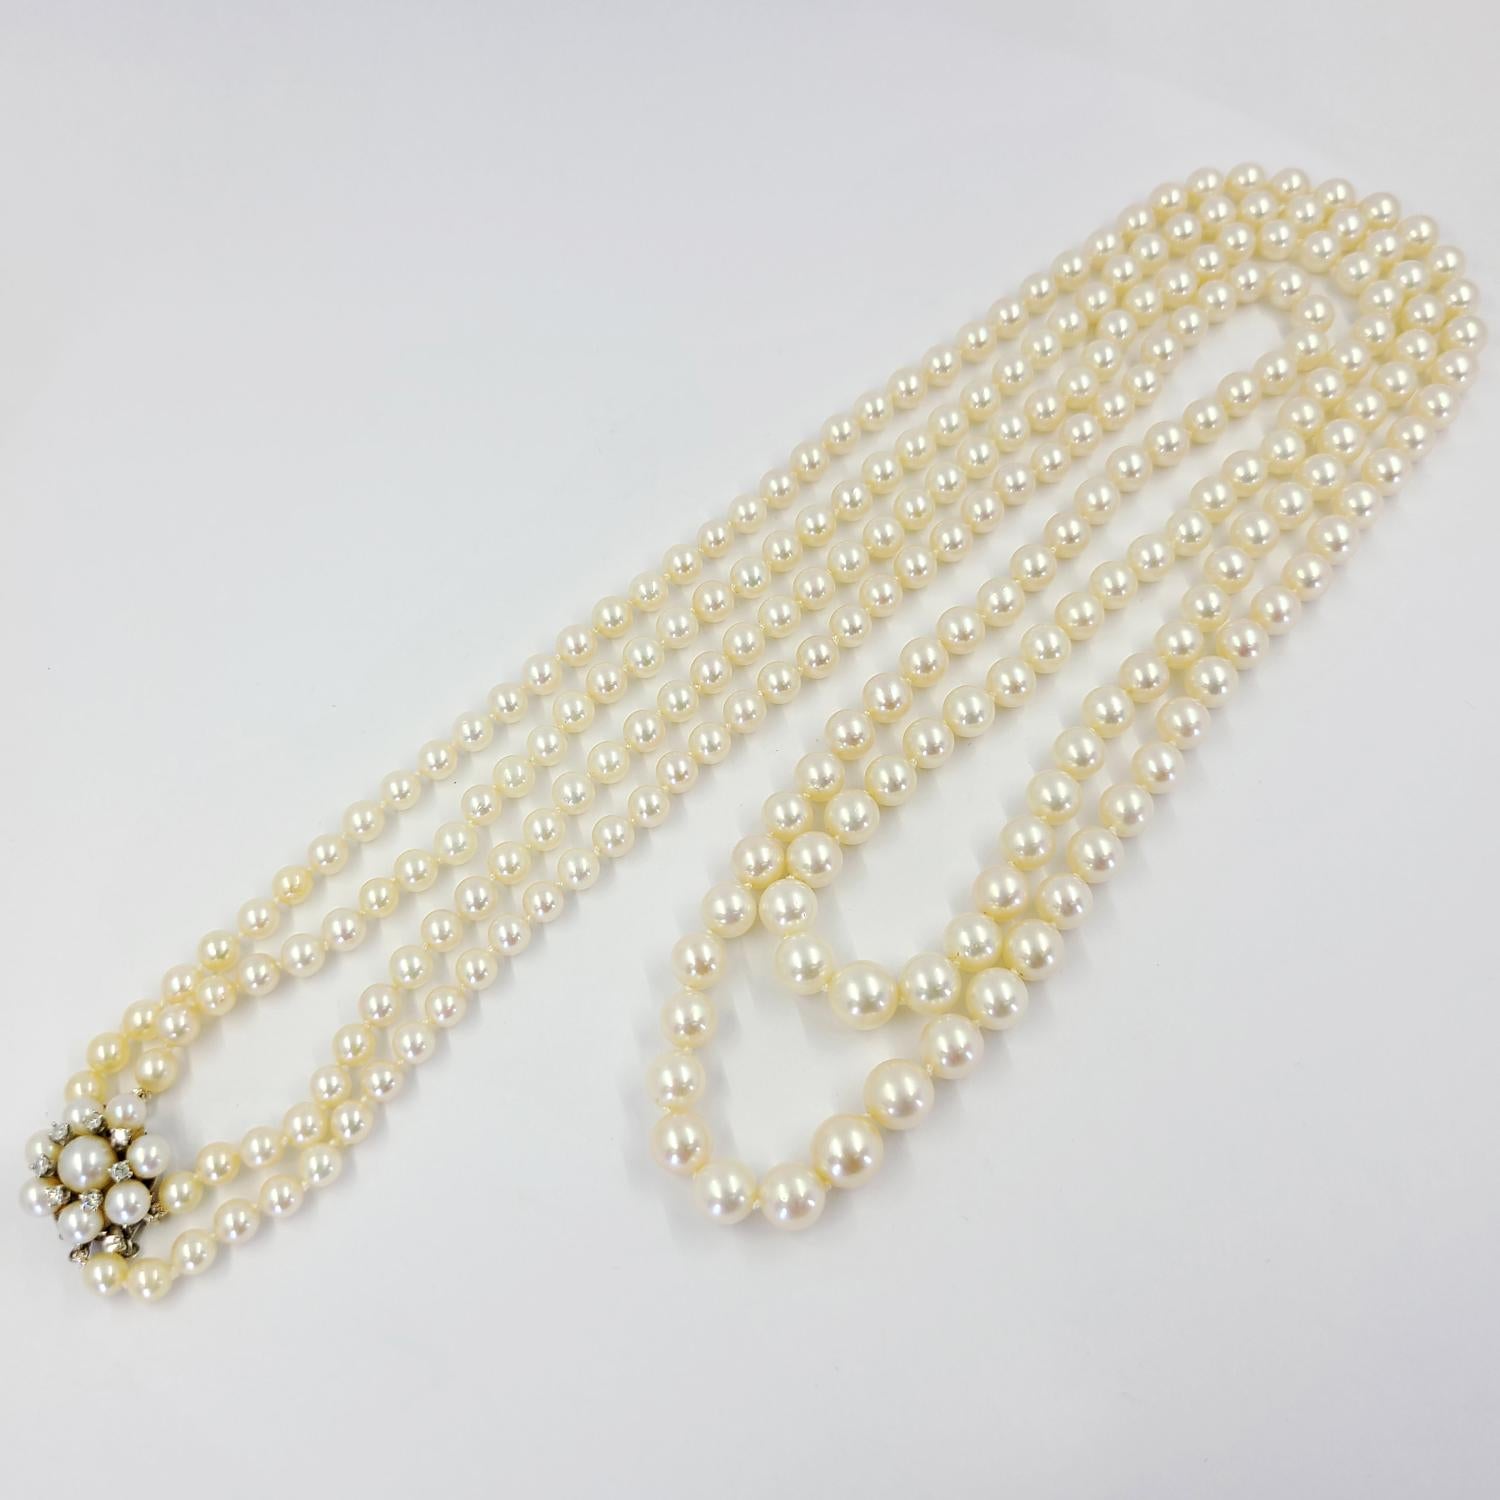 14 Karat White Gold Double Strand Cultured Pearl Necklace Measuring 32 and 34 Inches Long. 240 Round Cultured Pearls Graduate from 5mm to 8.5mm. Clasp Contains 7 Single Cut Diamonds of VS Clarity and G/H Color Total 0.15 Carats.